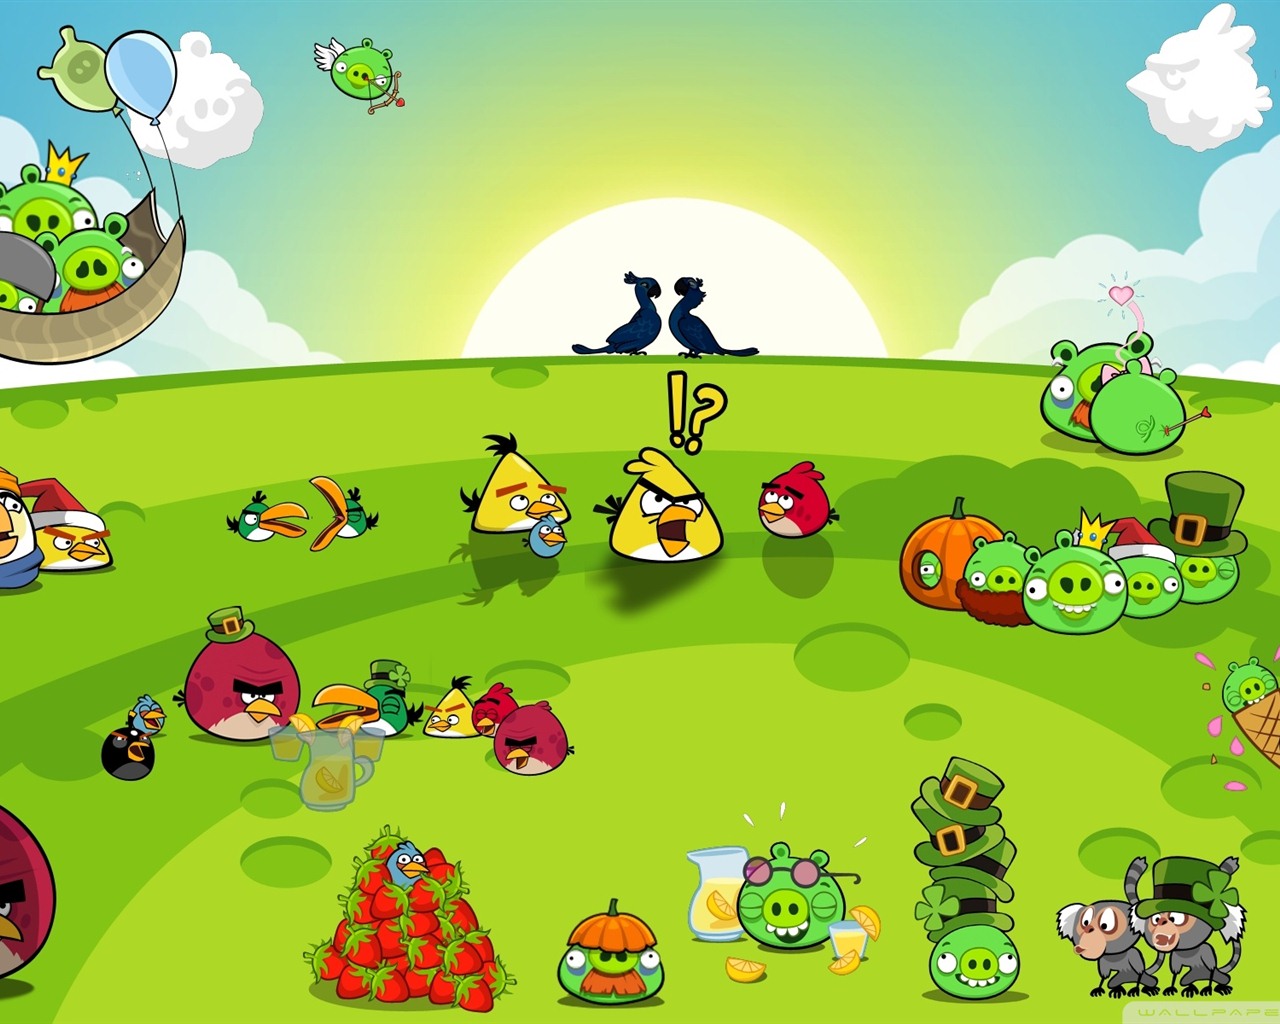 Angry Birds Spiel wallpapers #11 - 1280x1024